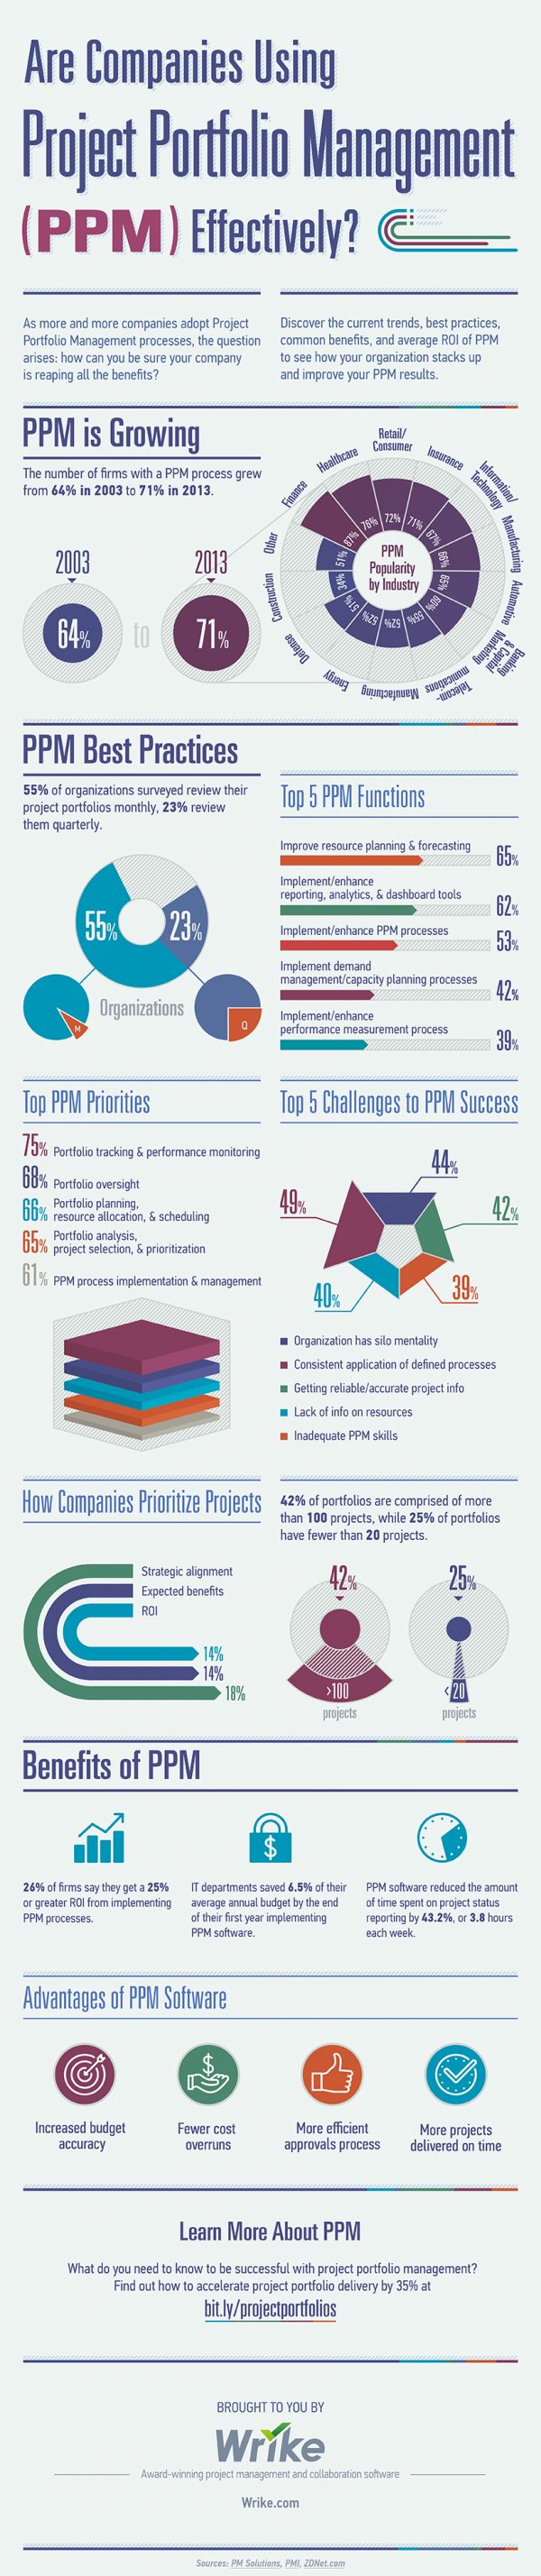 Is Your Company Using Project Portfolio Management (PPM) Effectively?